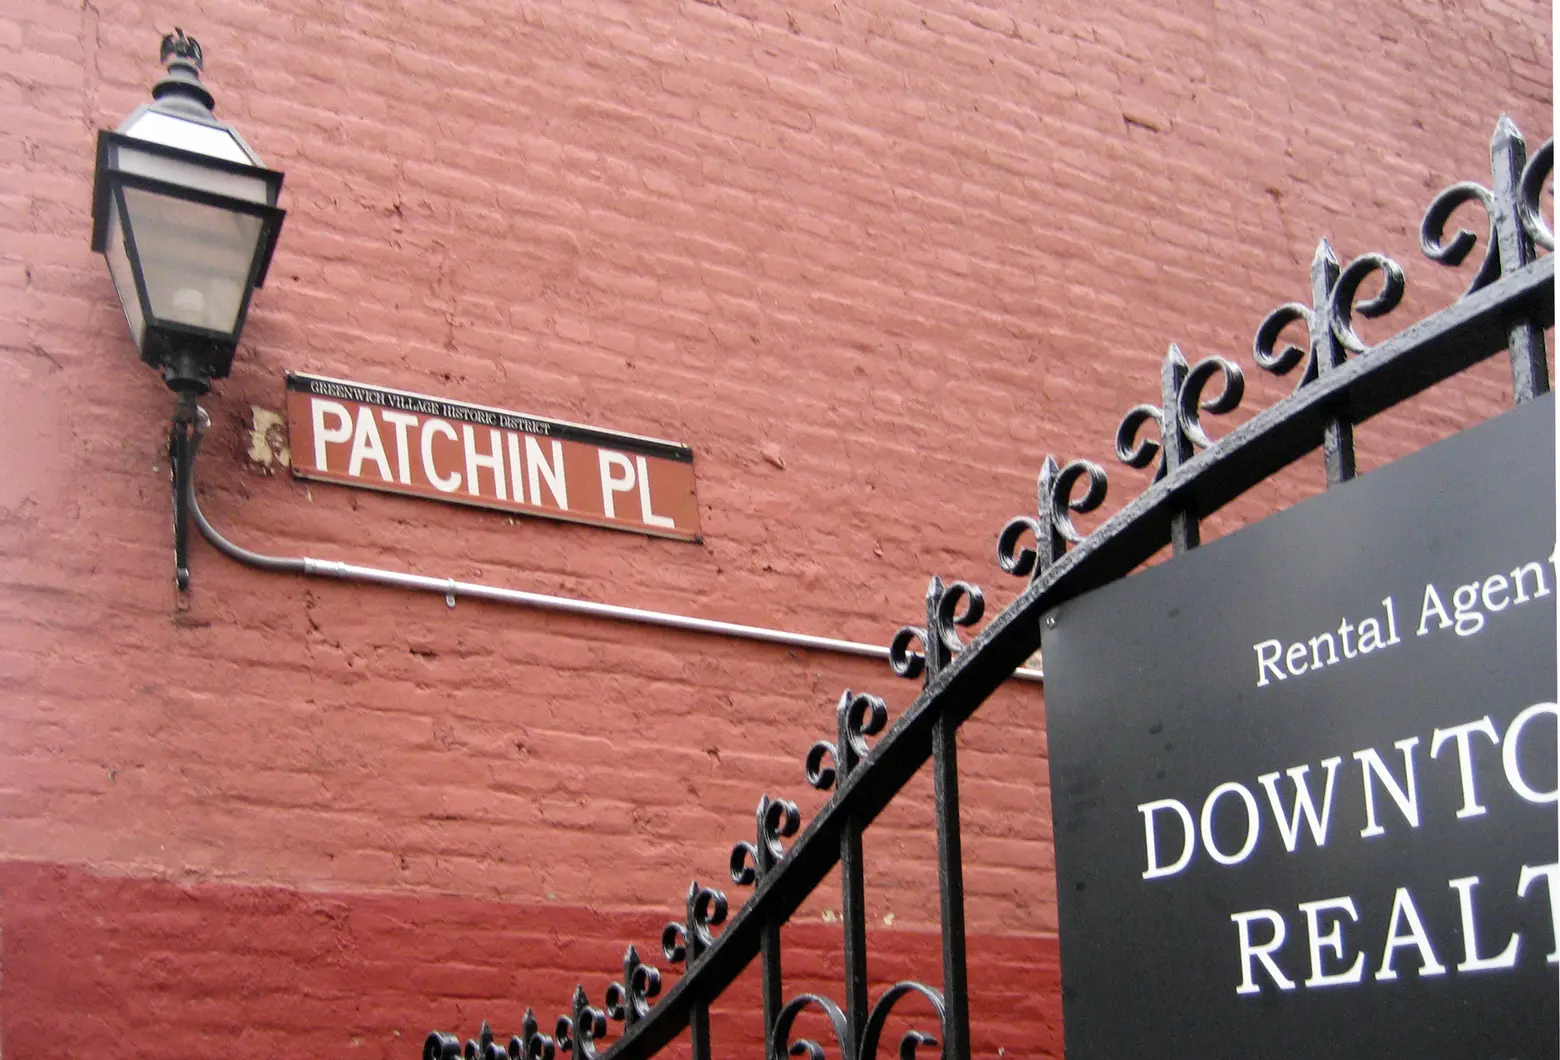 Patchin Place